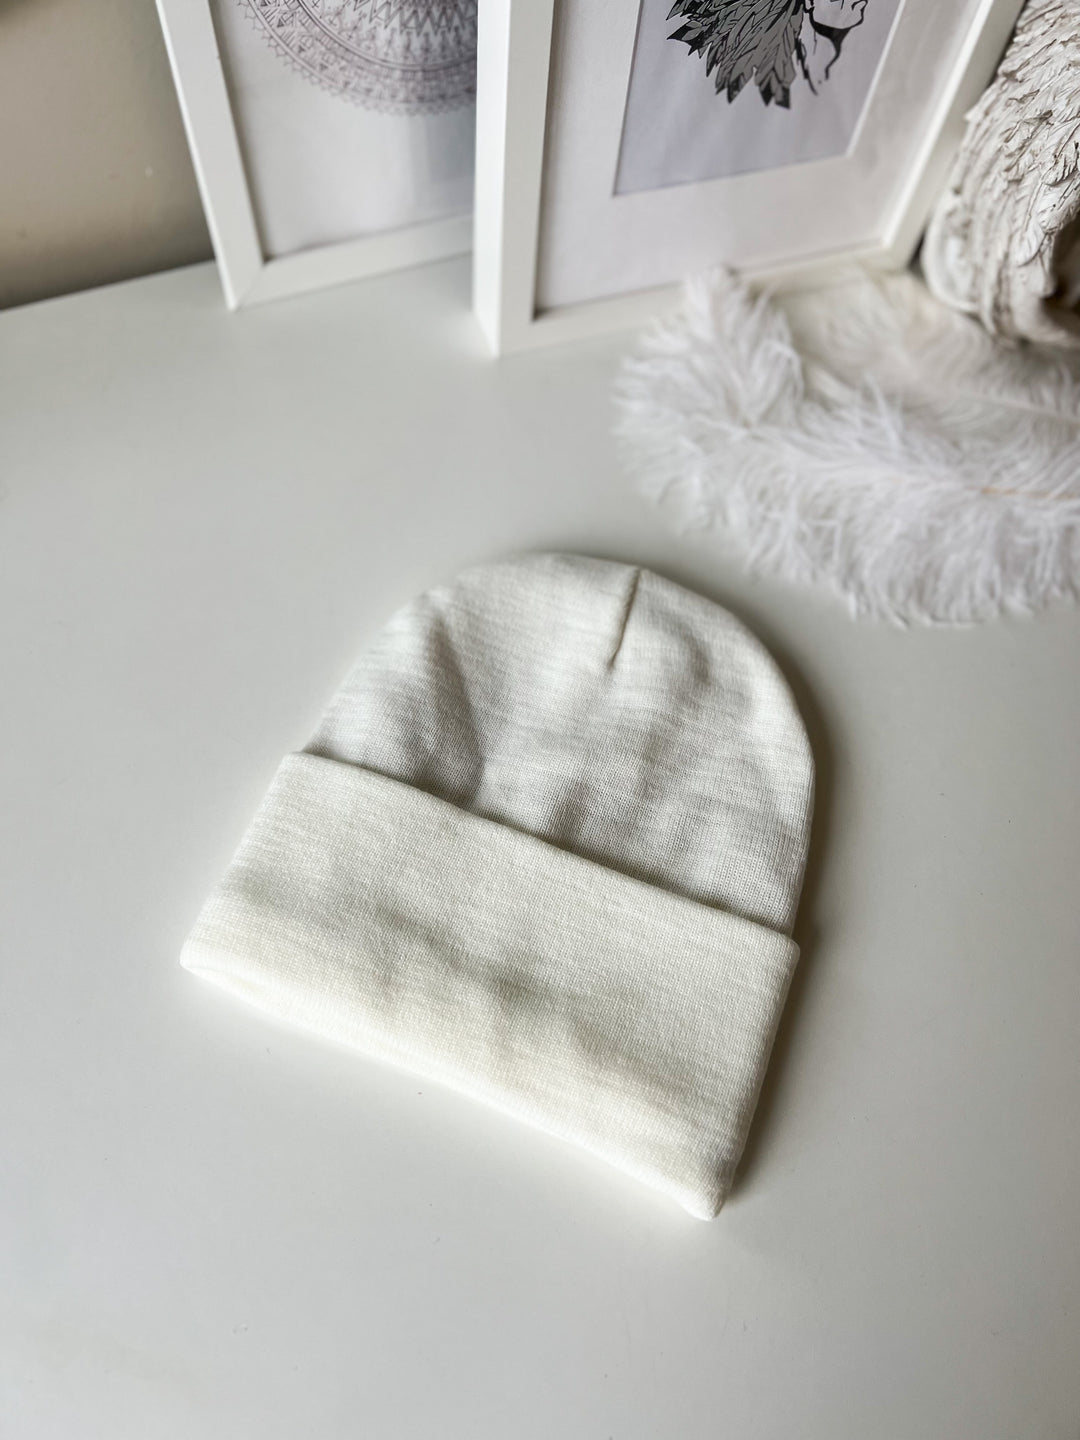 Beanie hat with satin lining